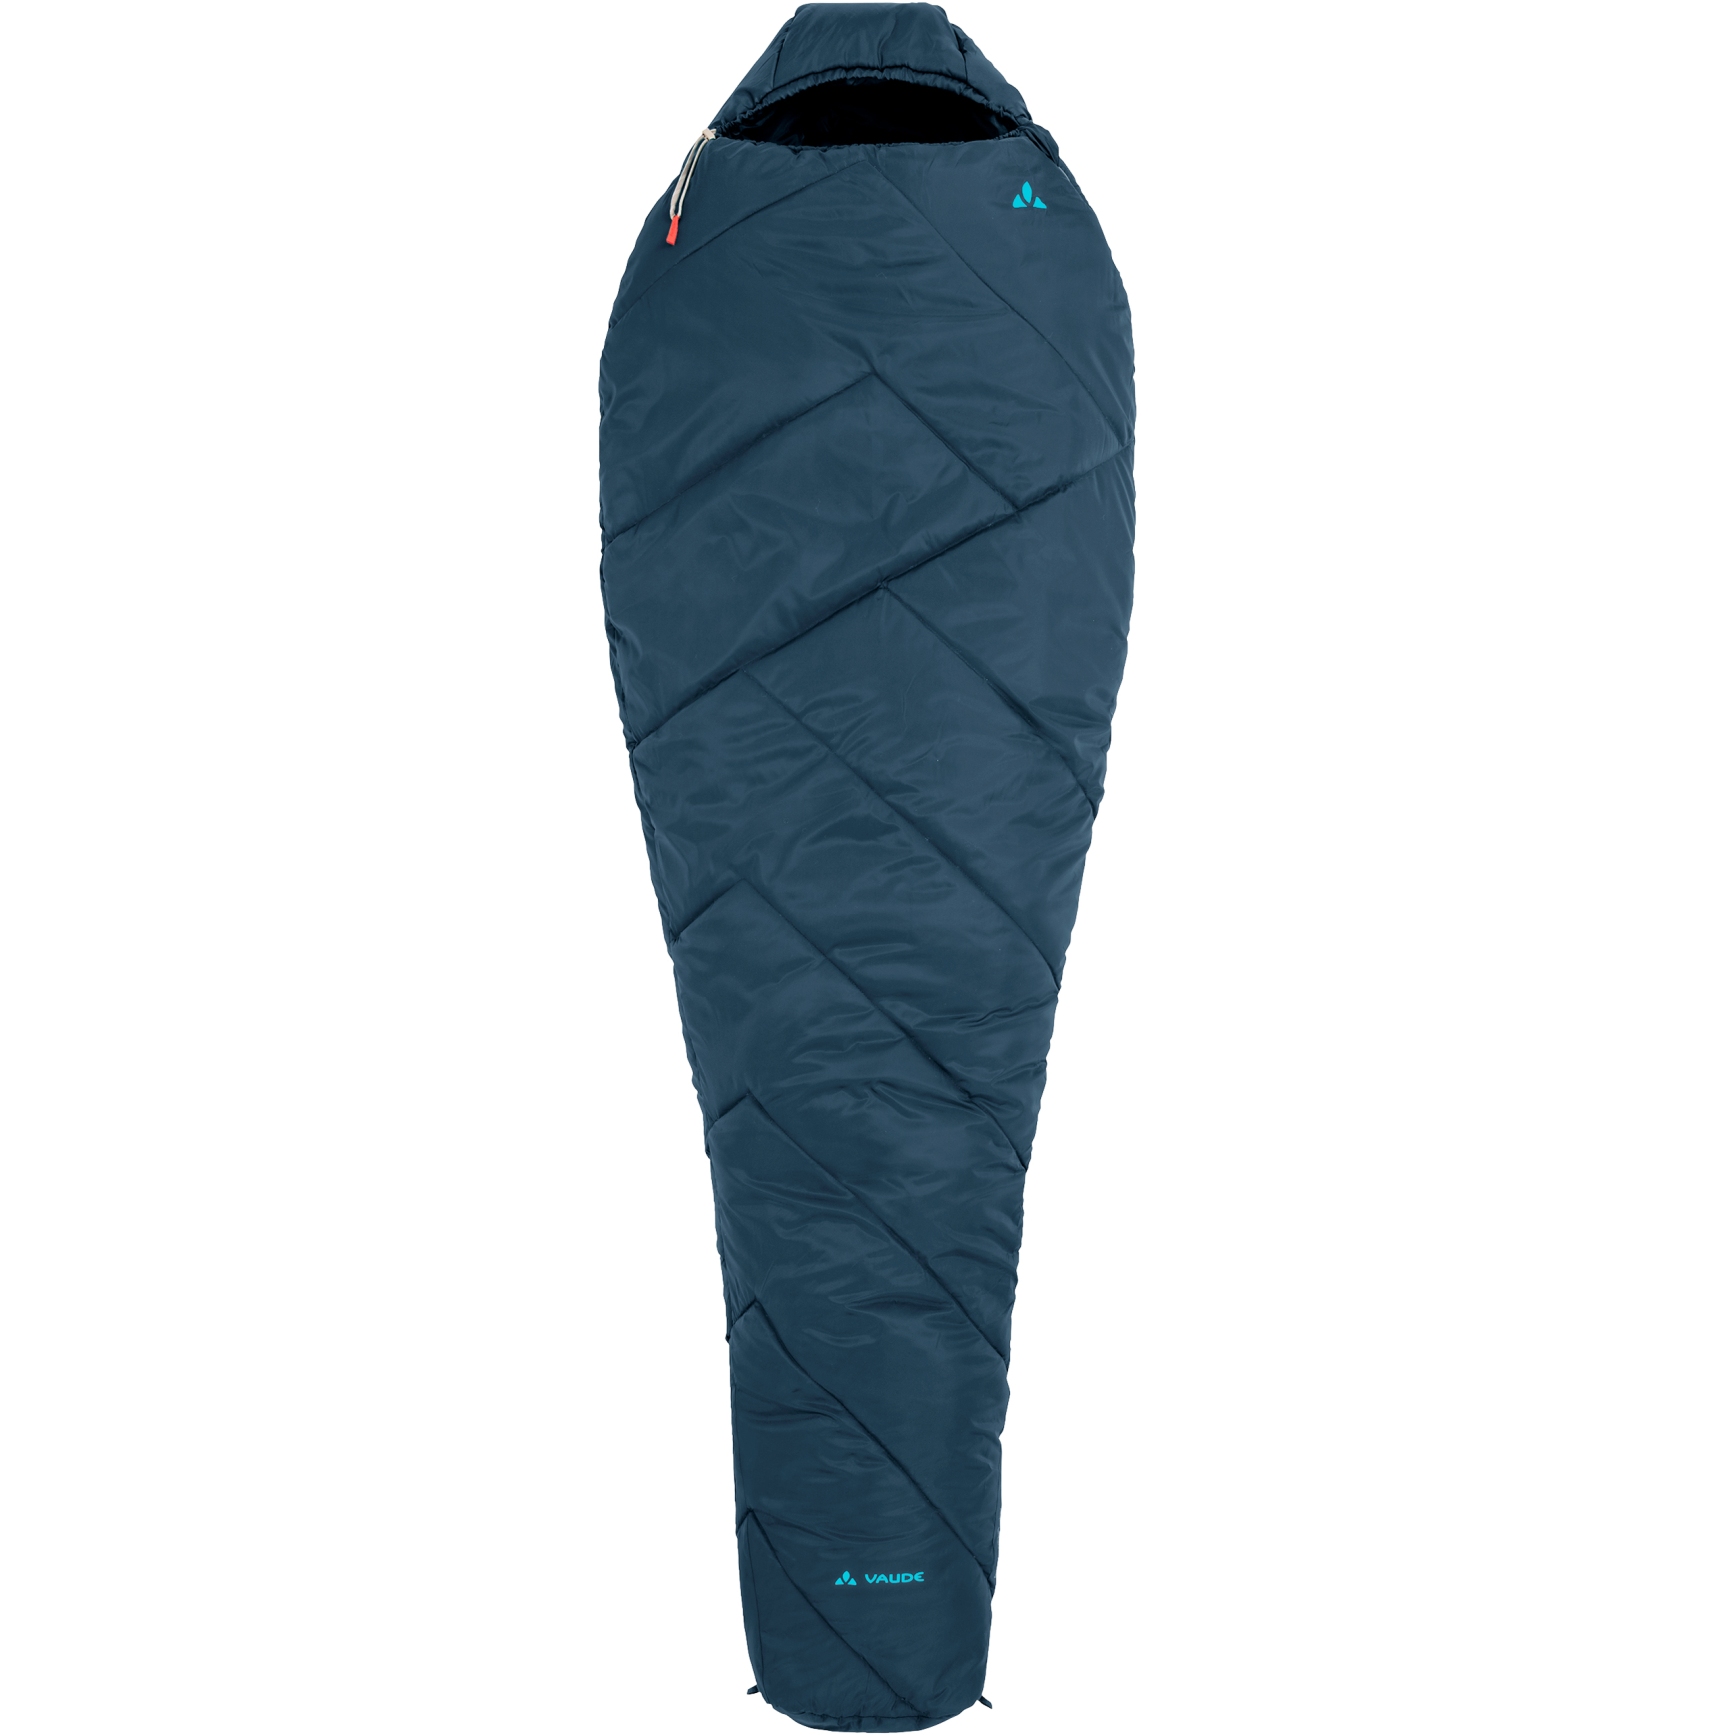 Picture of Vaude Sioux 800 XL II SYN Sleeping Bag - Zip right - baltic sea